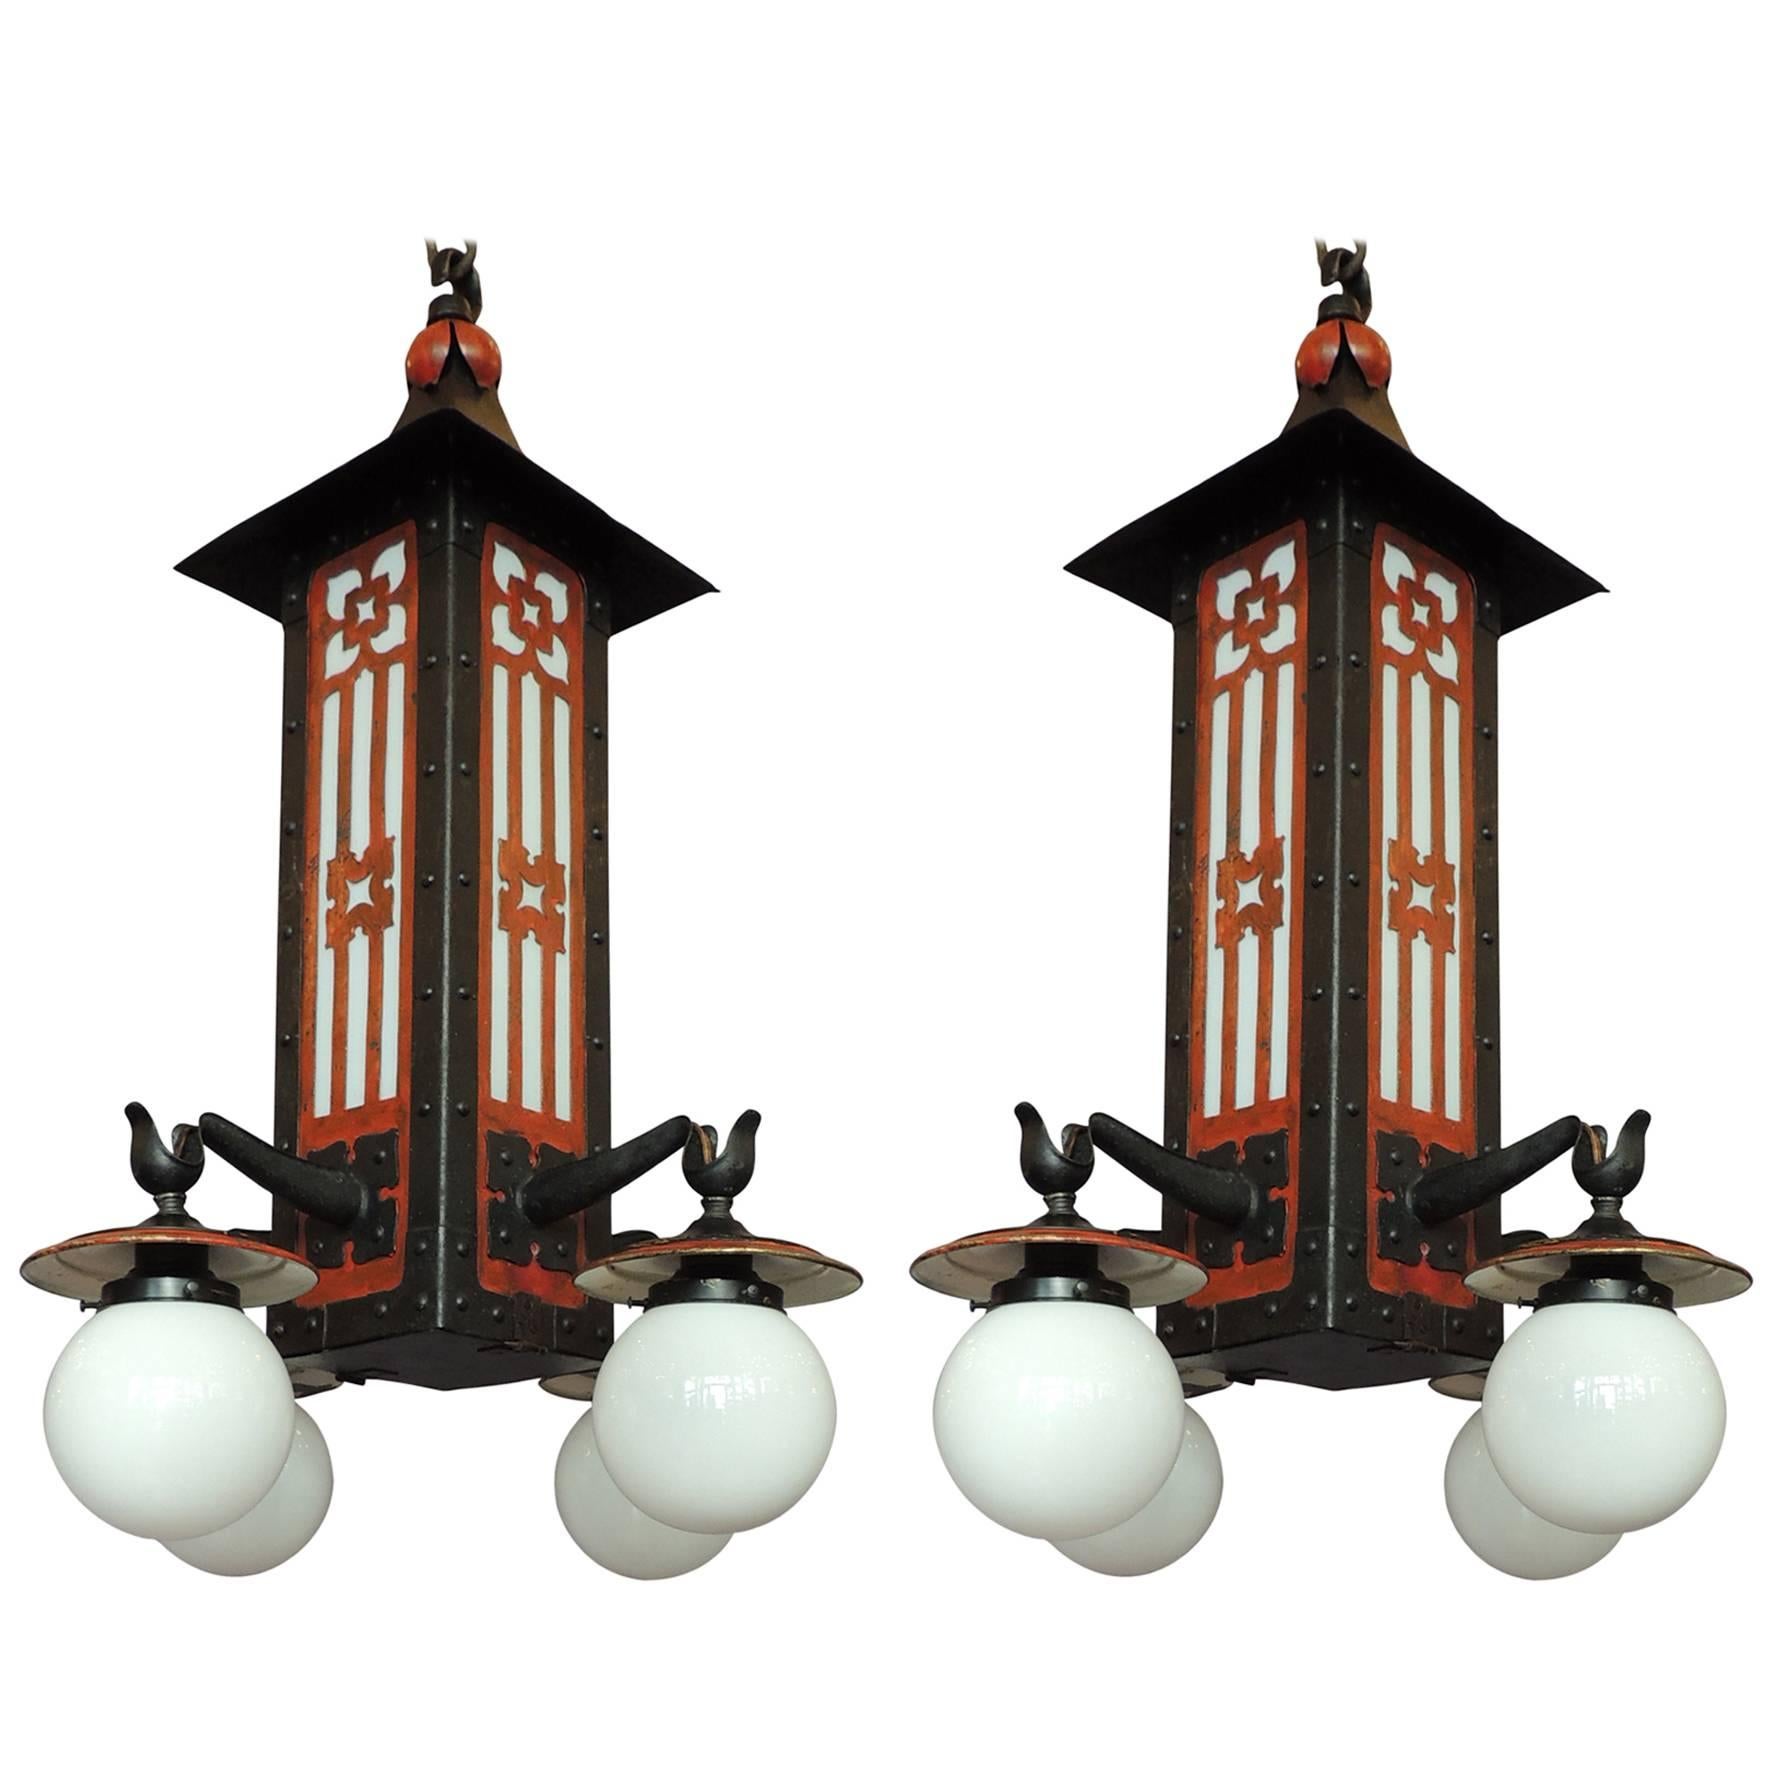 This large pair of lanterns were created in France in the early 20th century, circa 1910, and features black and red pagodas with four arms with milk glass shades. The lanterns can be used in interior or exterior spaces and have been rewired with